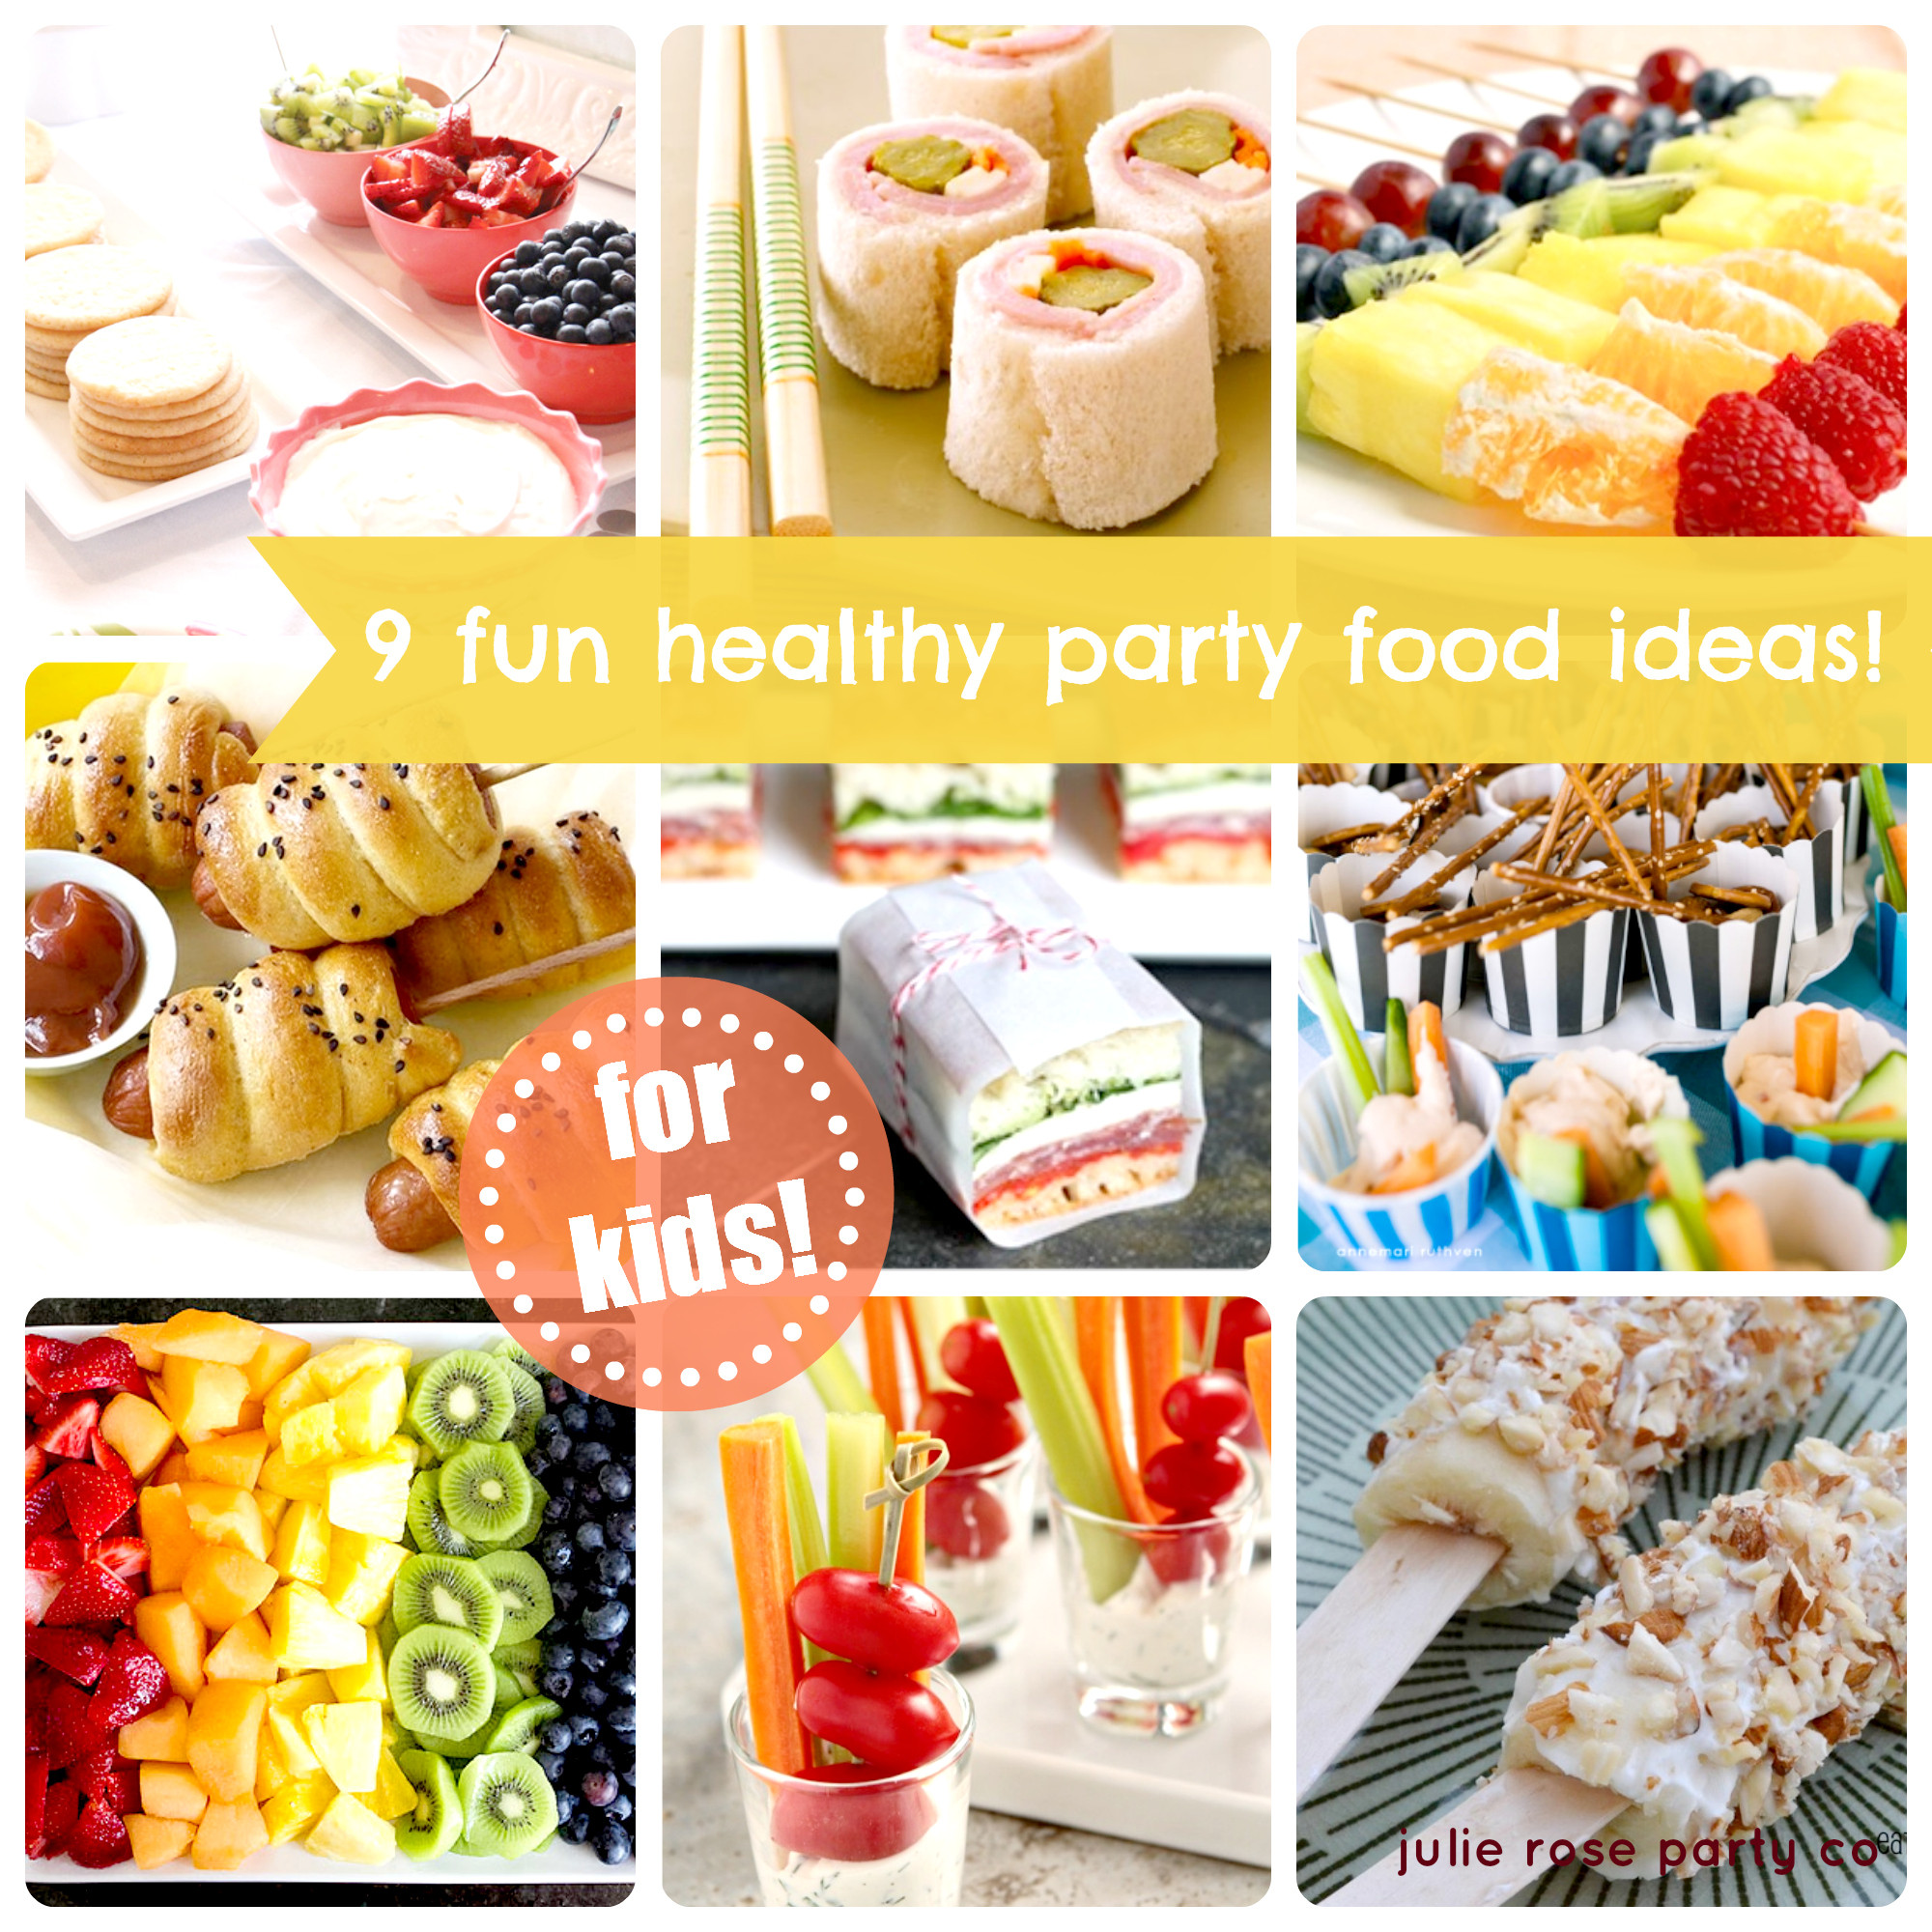 Kids Party Food List
 9 fun and healthy party food ideas kids